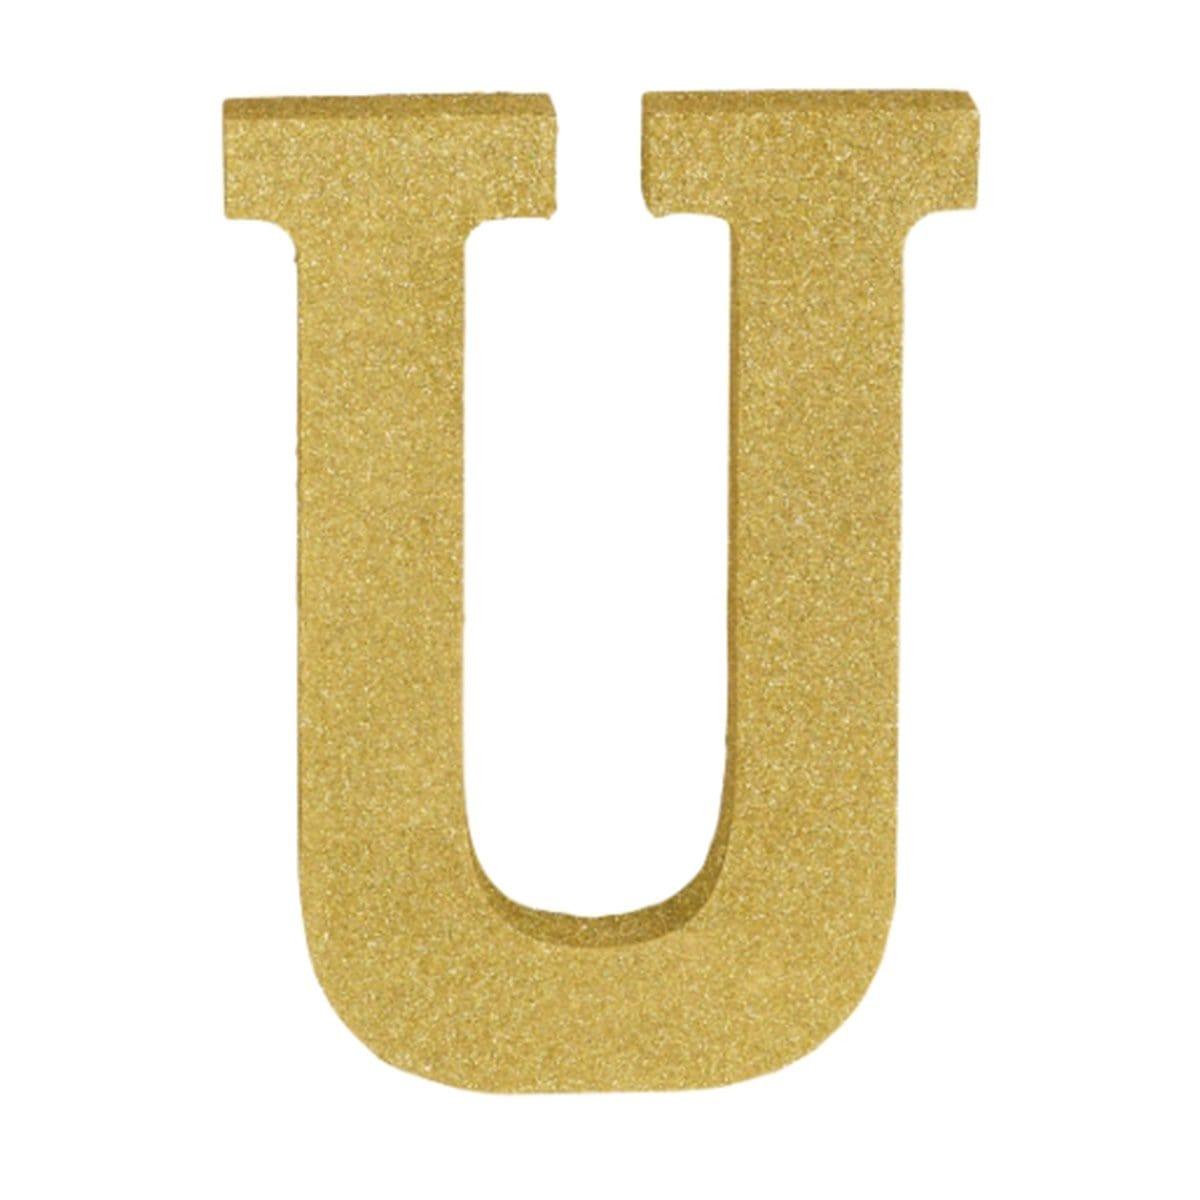 Buy Decorations Gold Glitter Letter - U sold at Party Expert